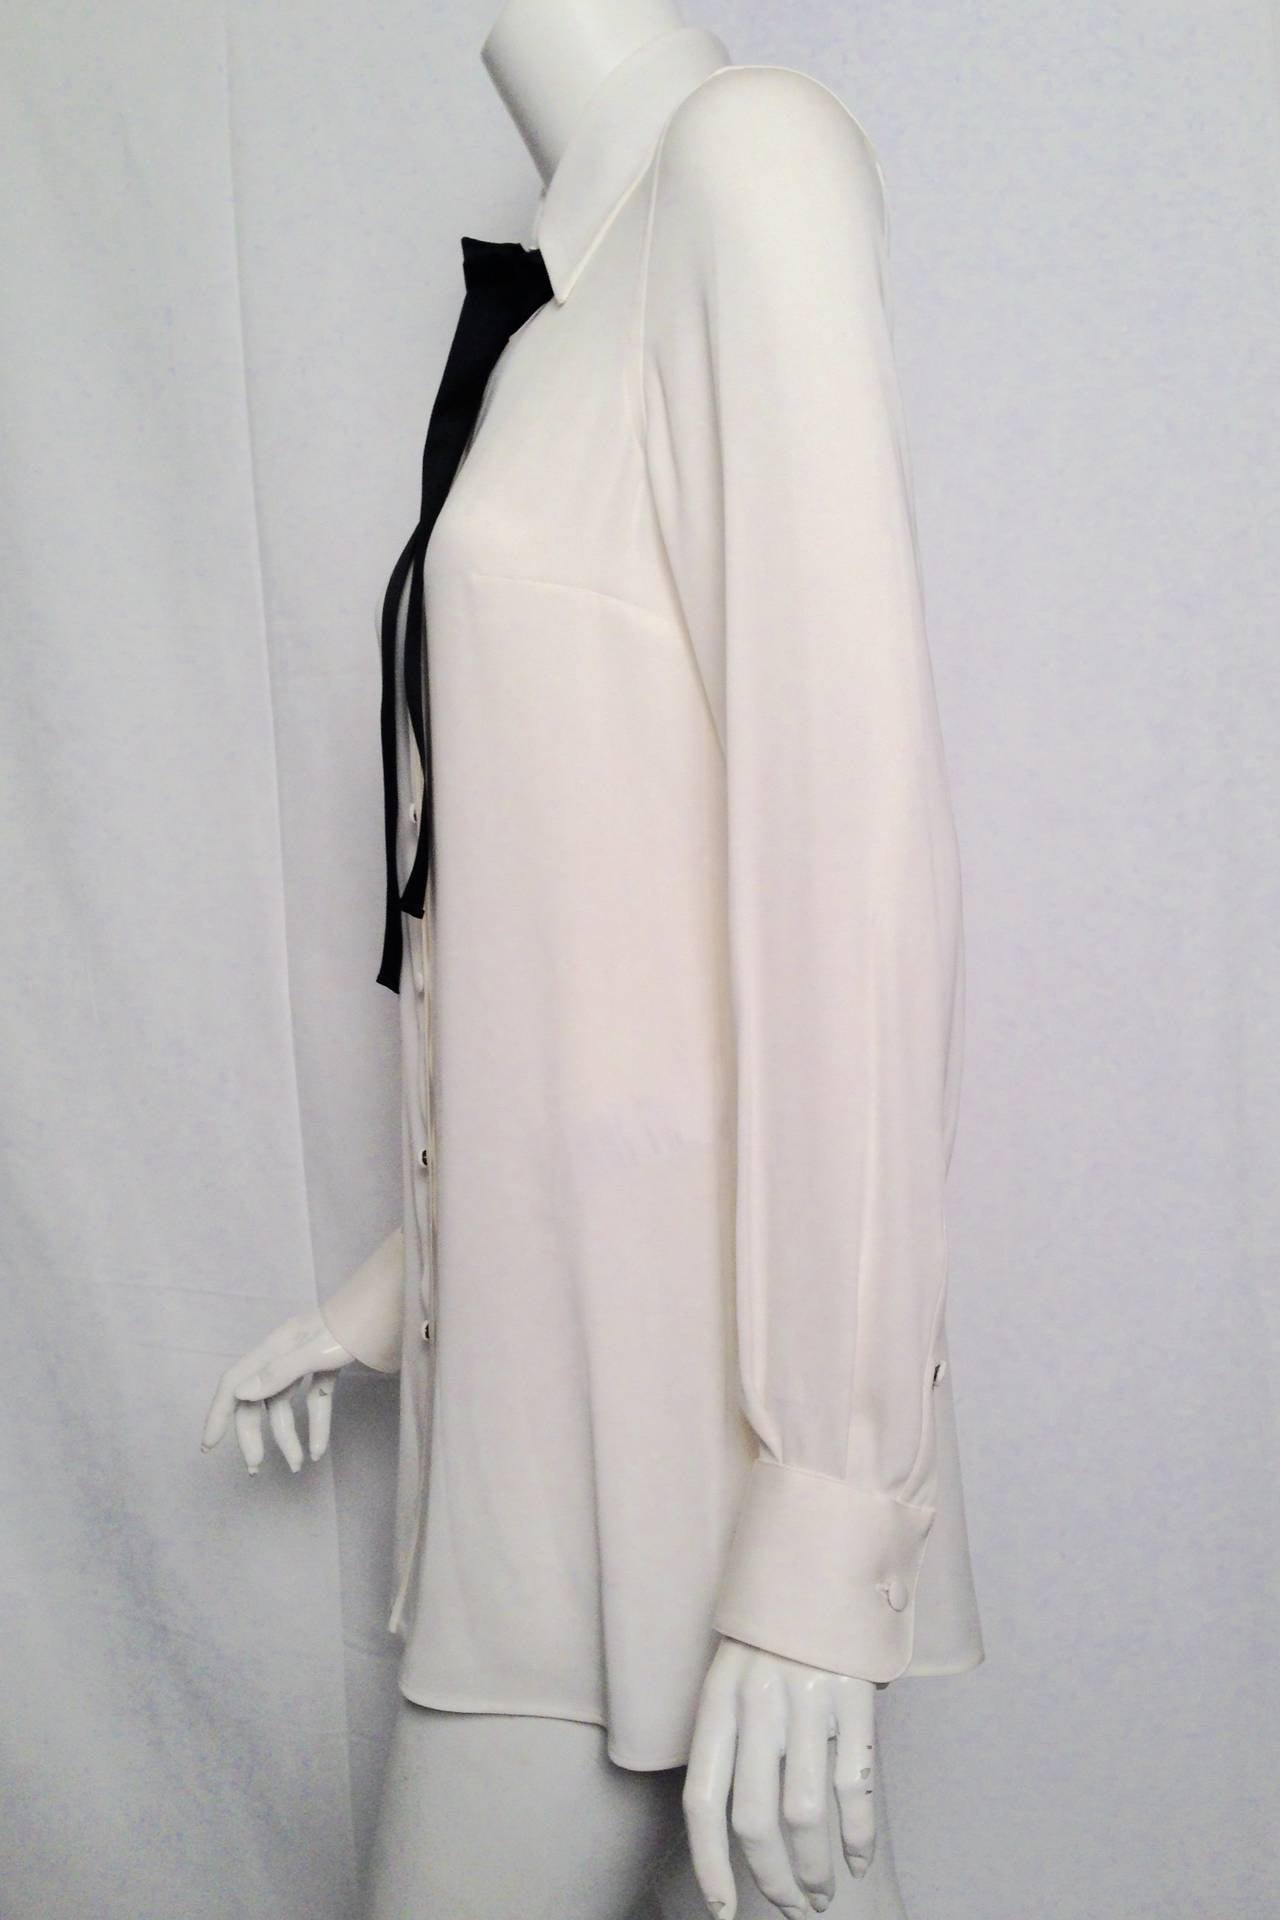 Dolce & Gabbana Silk Stretch Blouse With Silk Satin Tie In New Condition For Sale In Palm Beach, FL